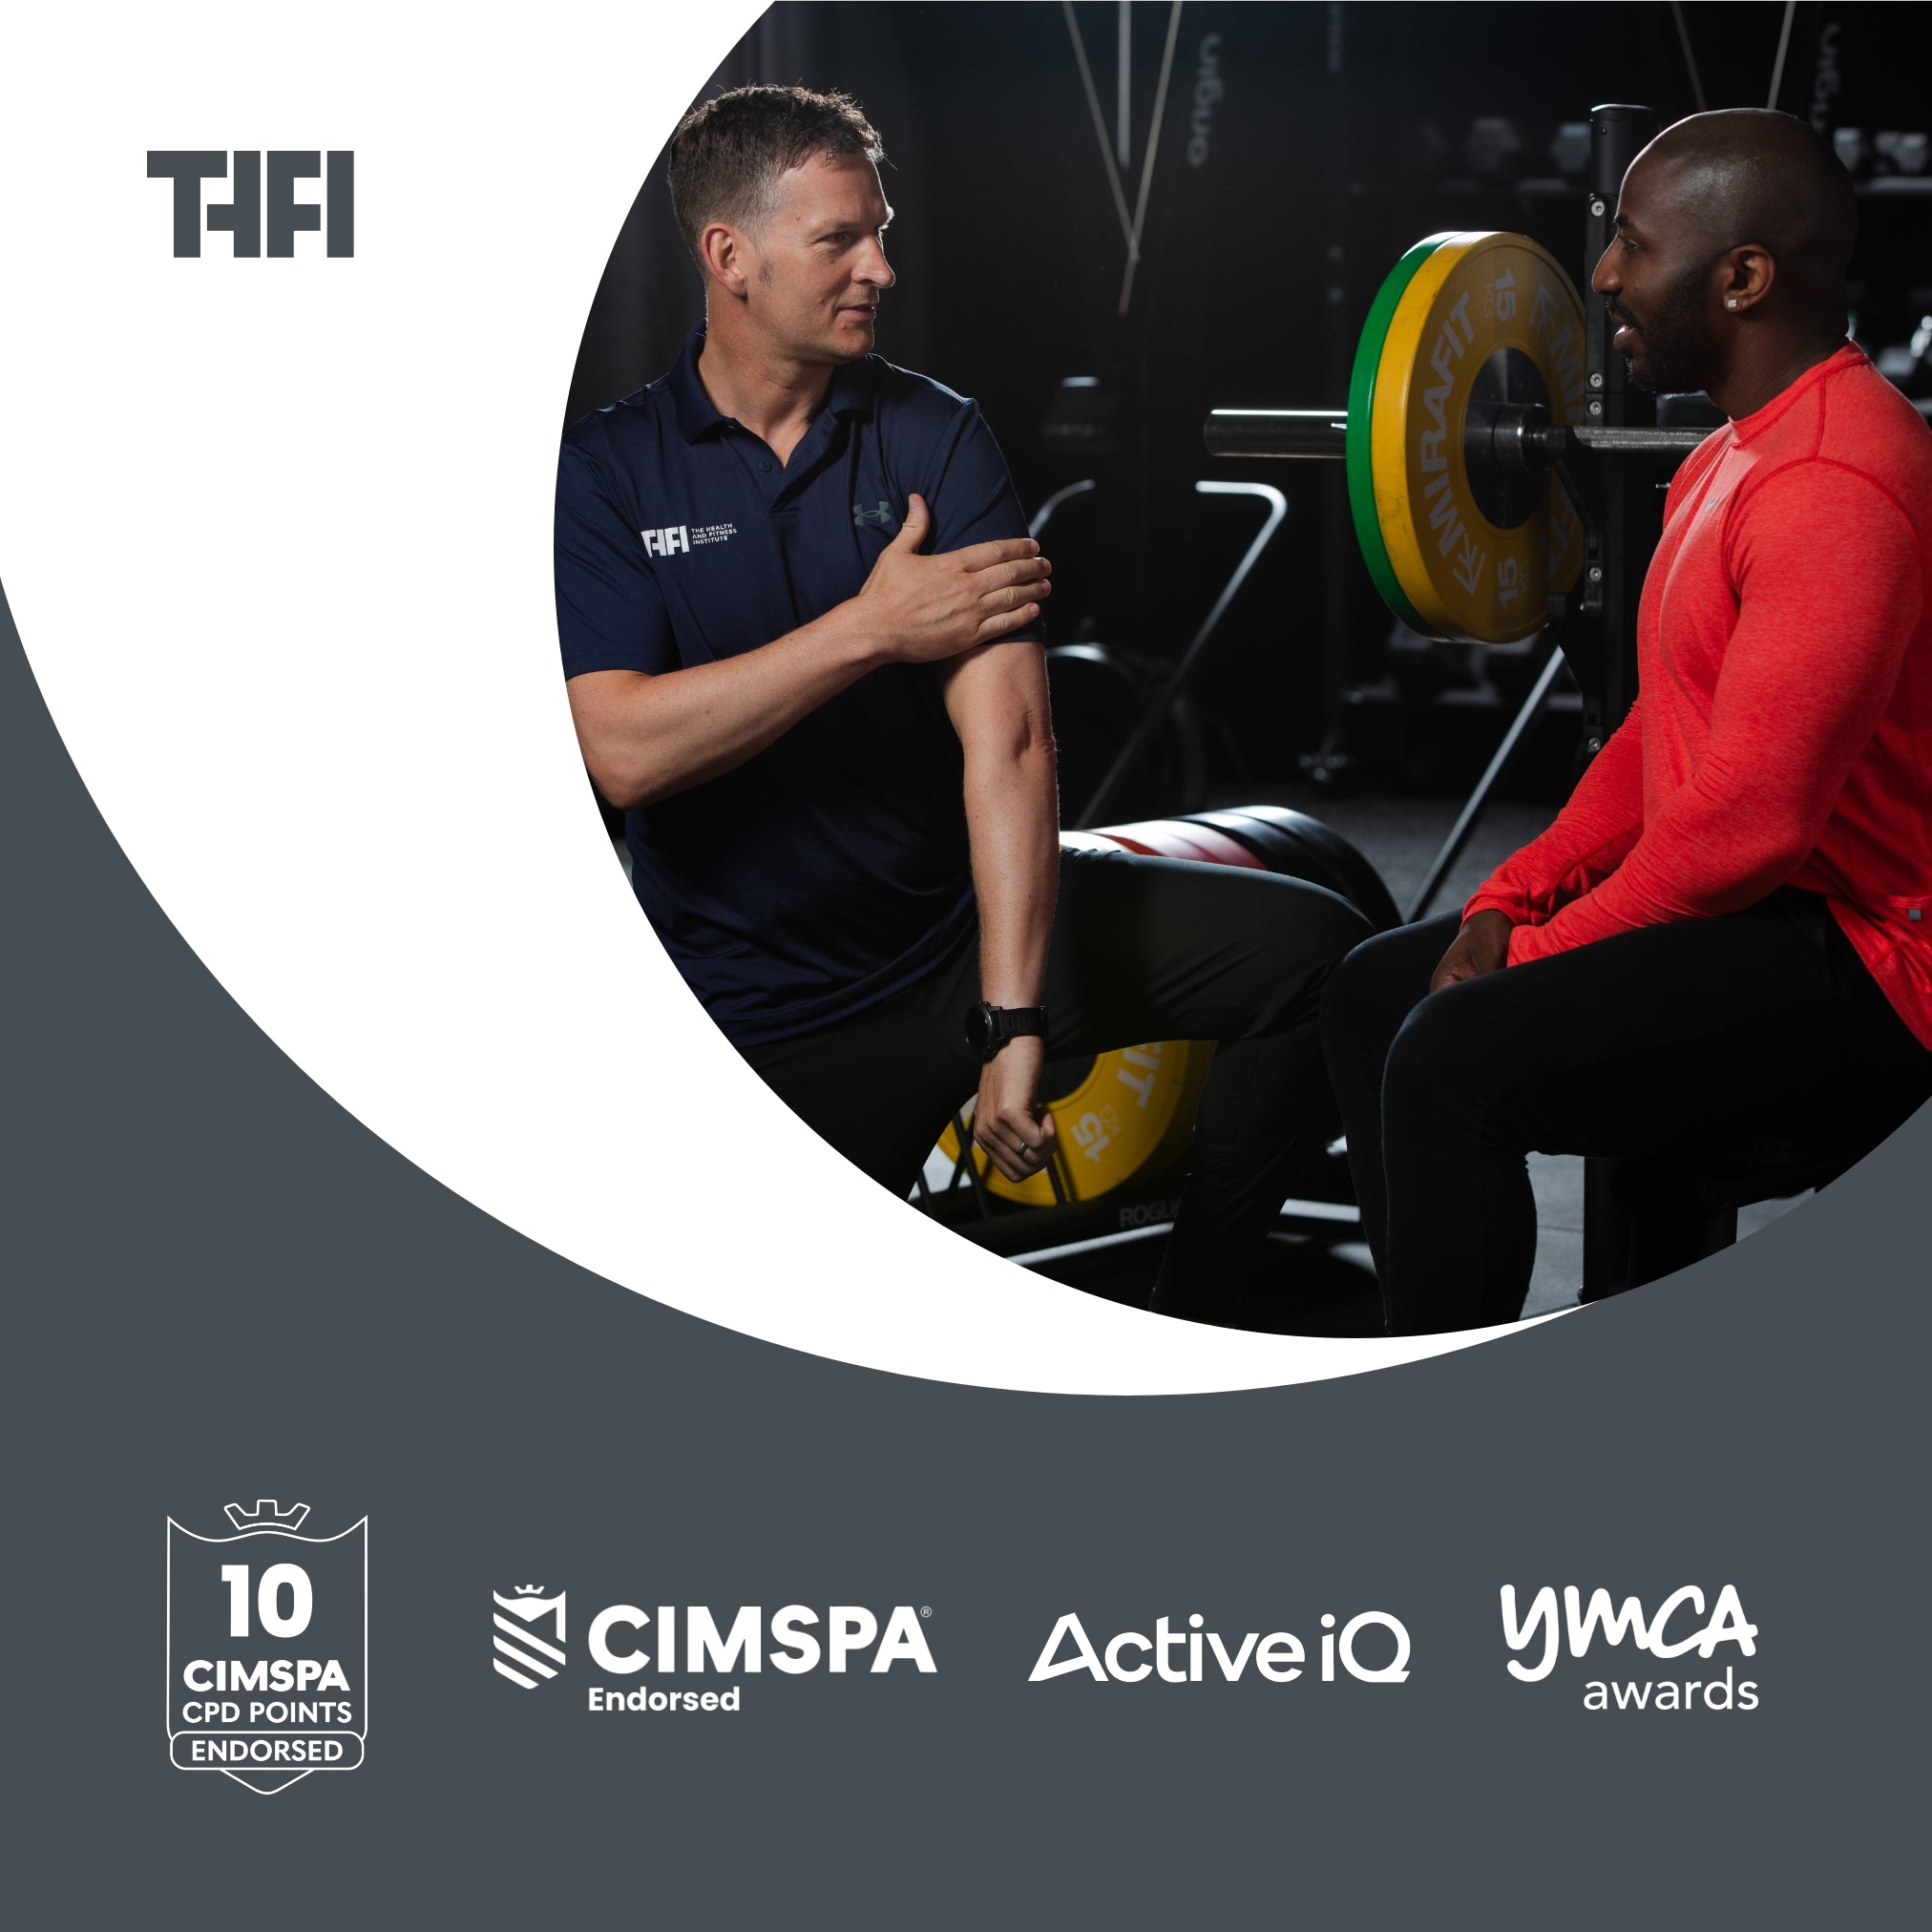 Level 4 Strength and Conditioning Coach - The Health and Fitness Institute